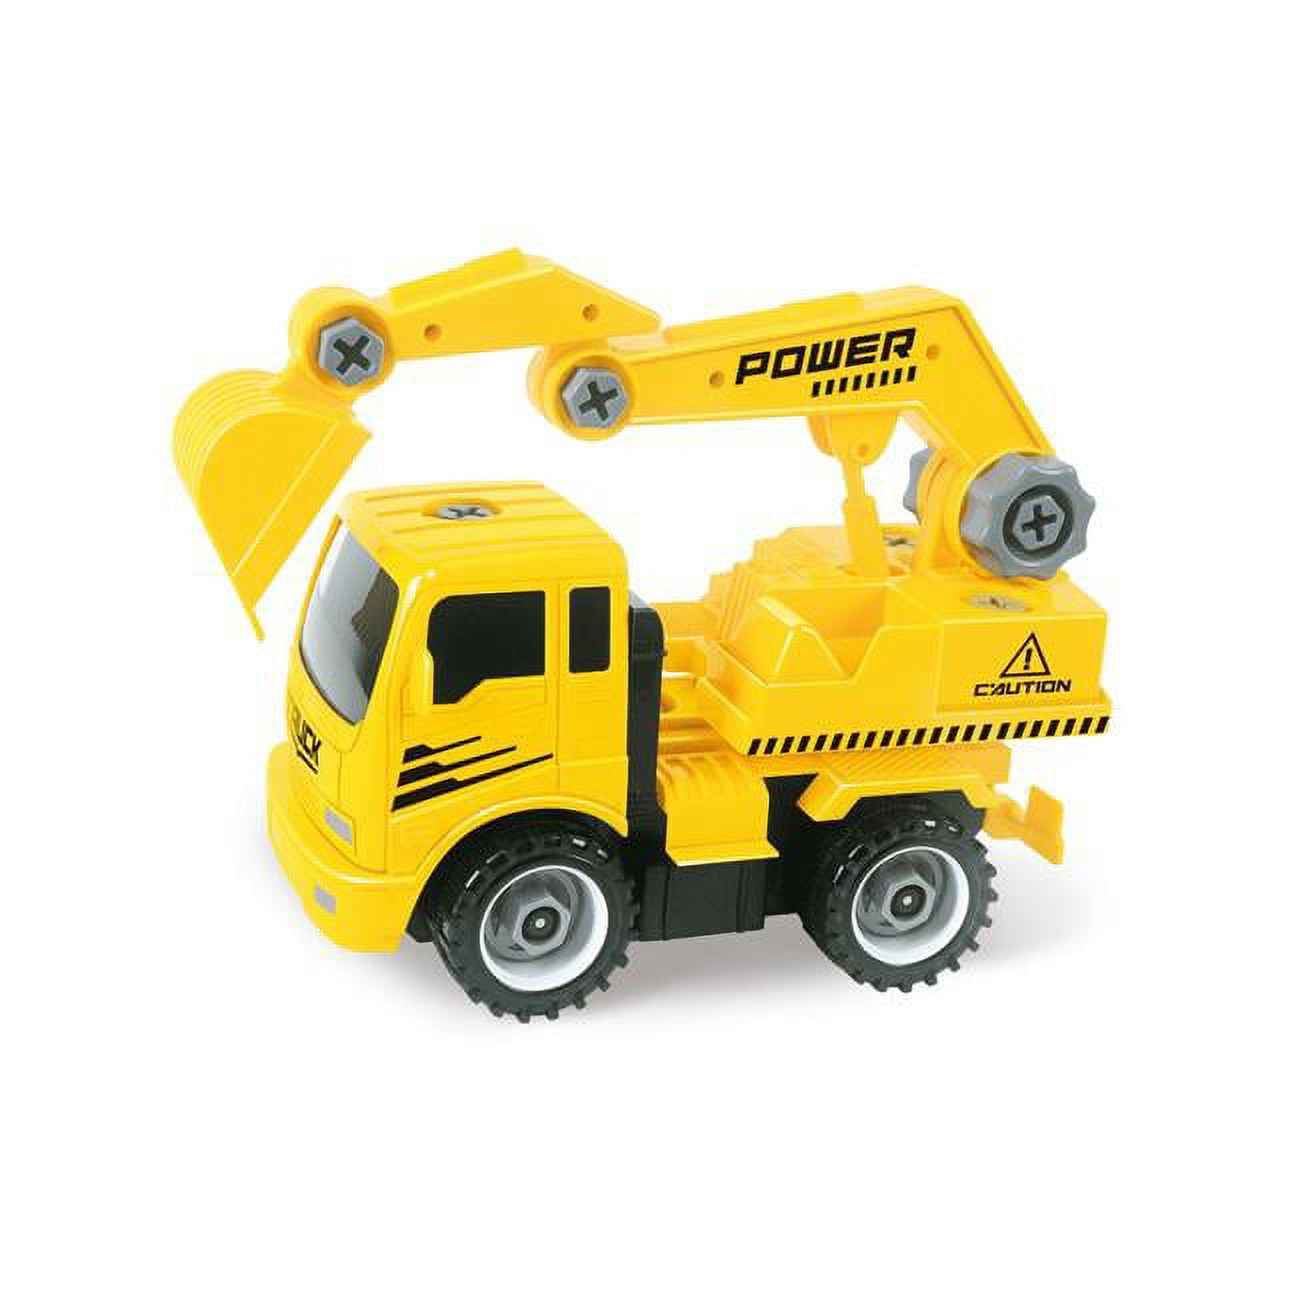 Ps559 Take-a-part Excavator Truck Set